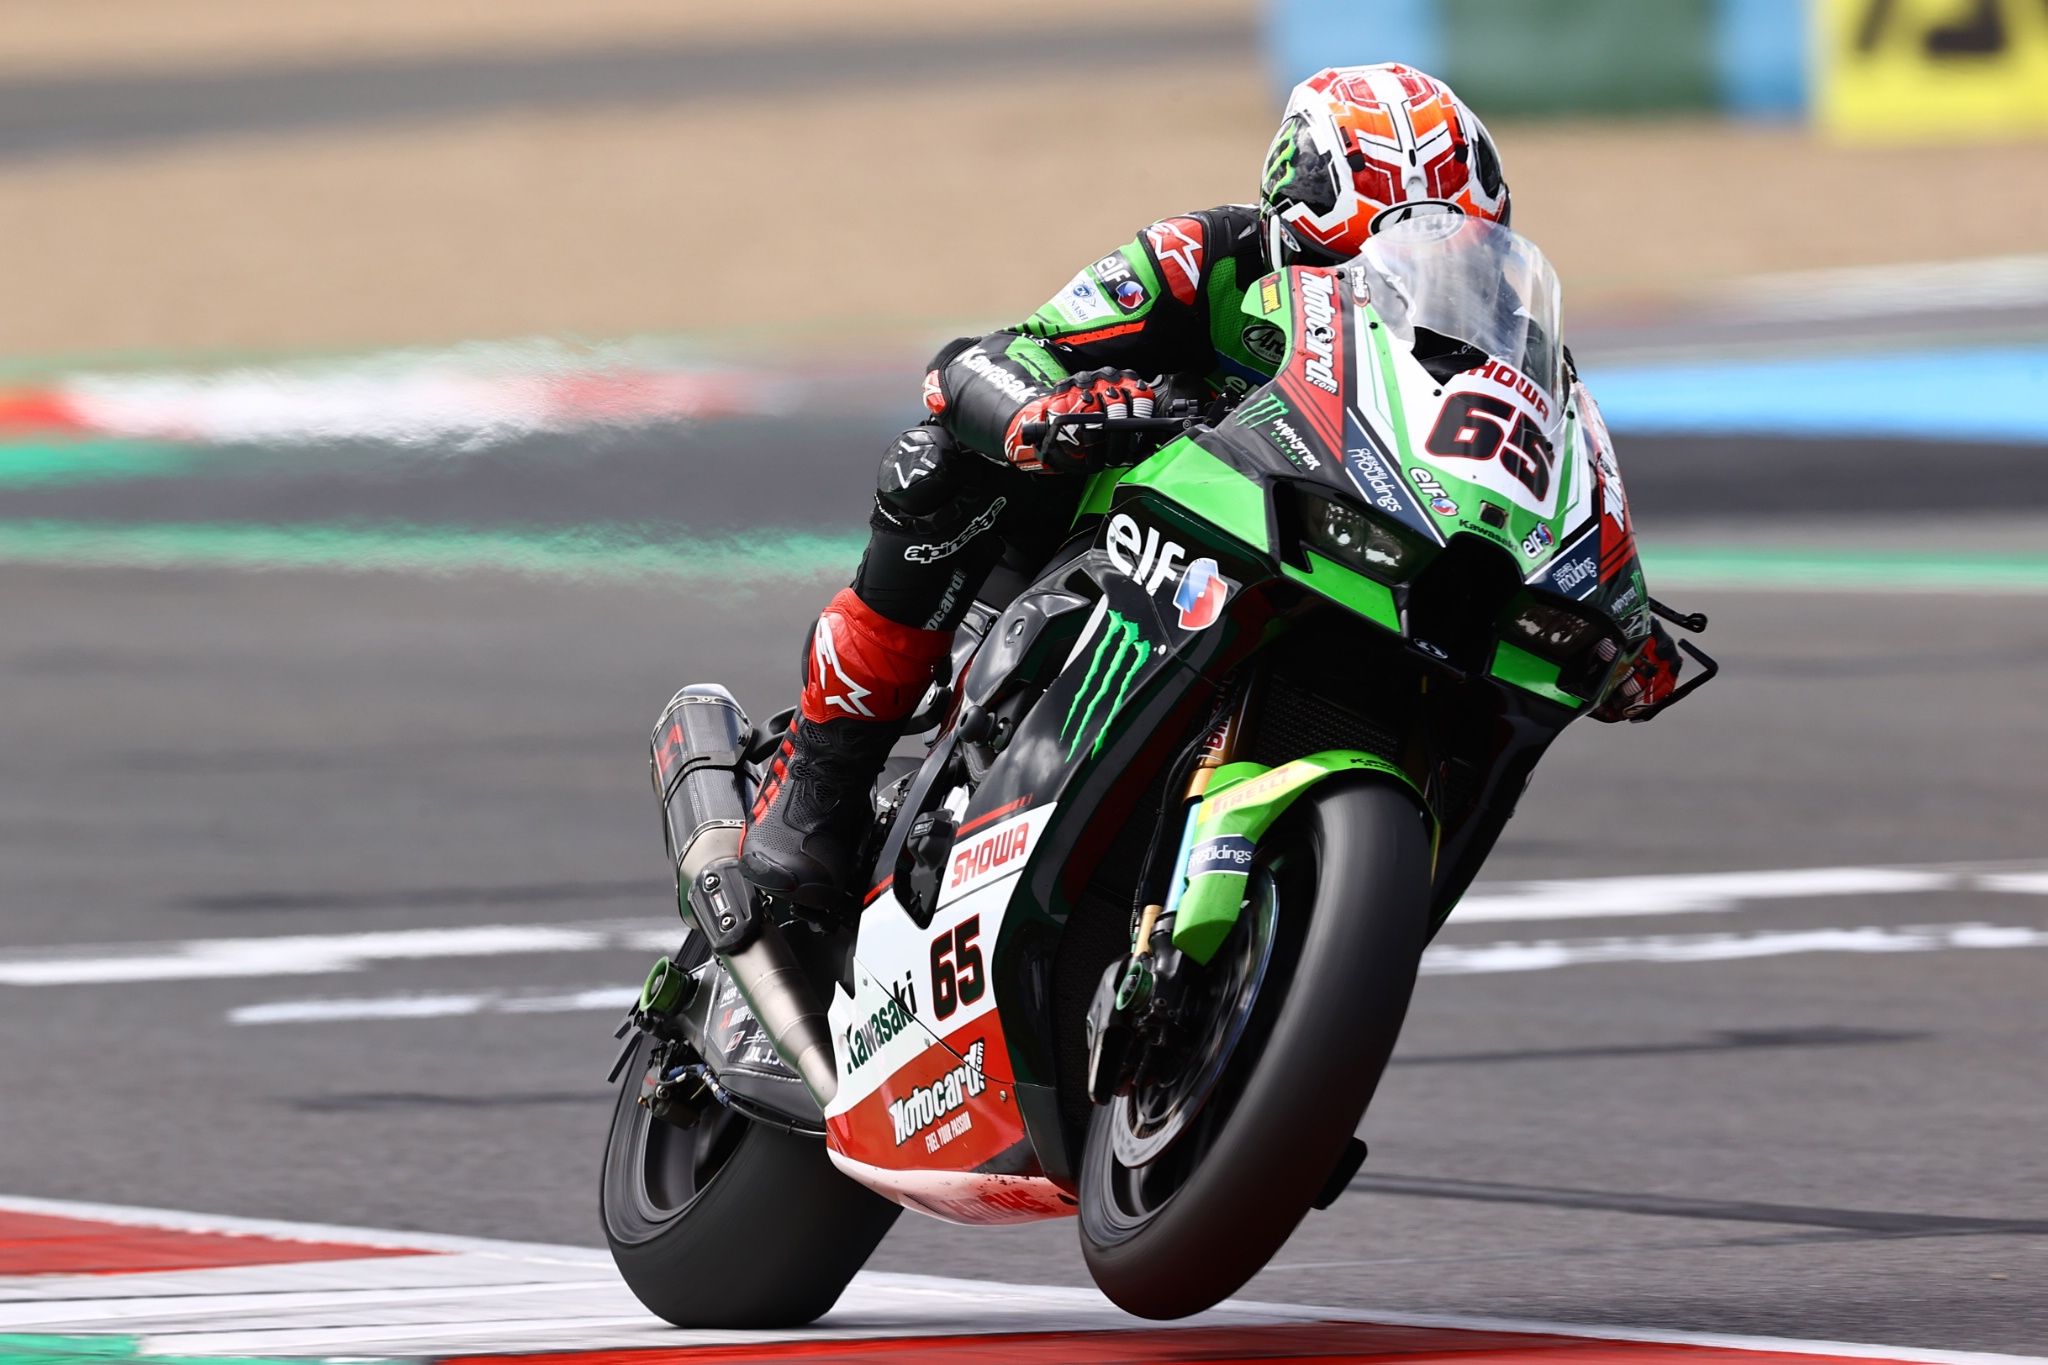 Jonathan Rea with hole in his fairing screen, French WorldSBK race1, 10 September